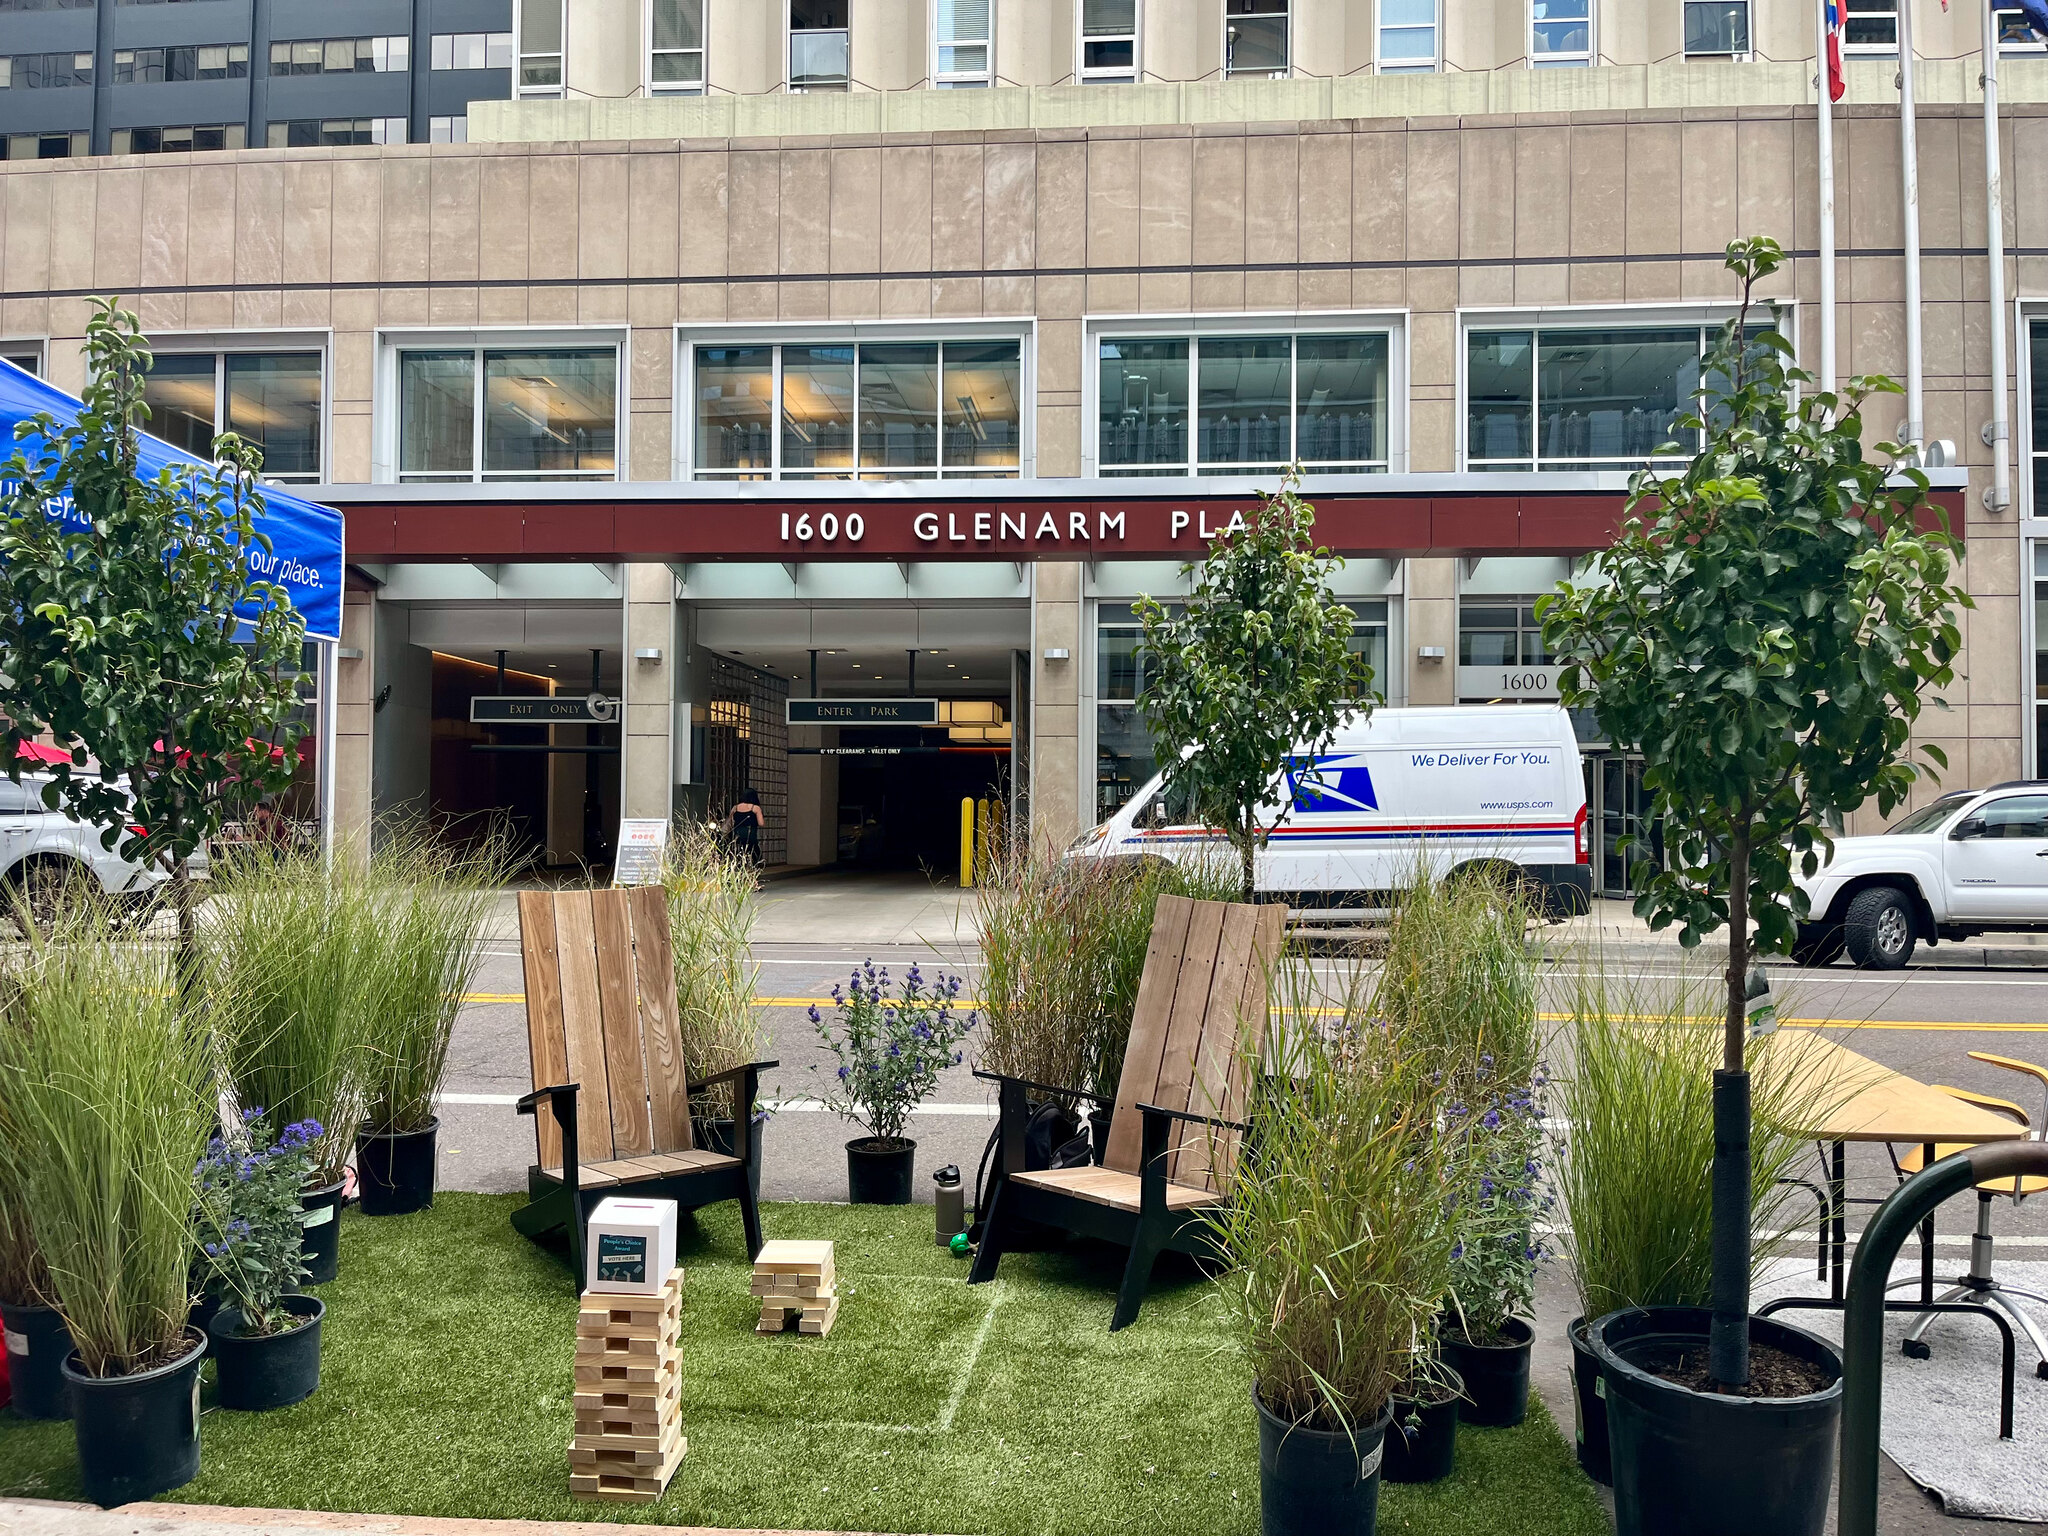 A small grass lawn, chairs, yard games and plants taking up a street parking space in Denver.